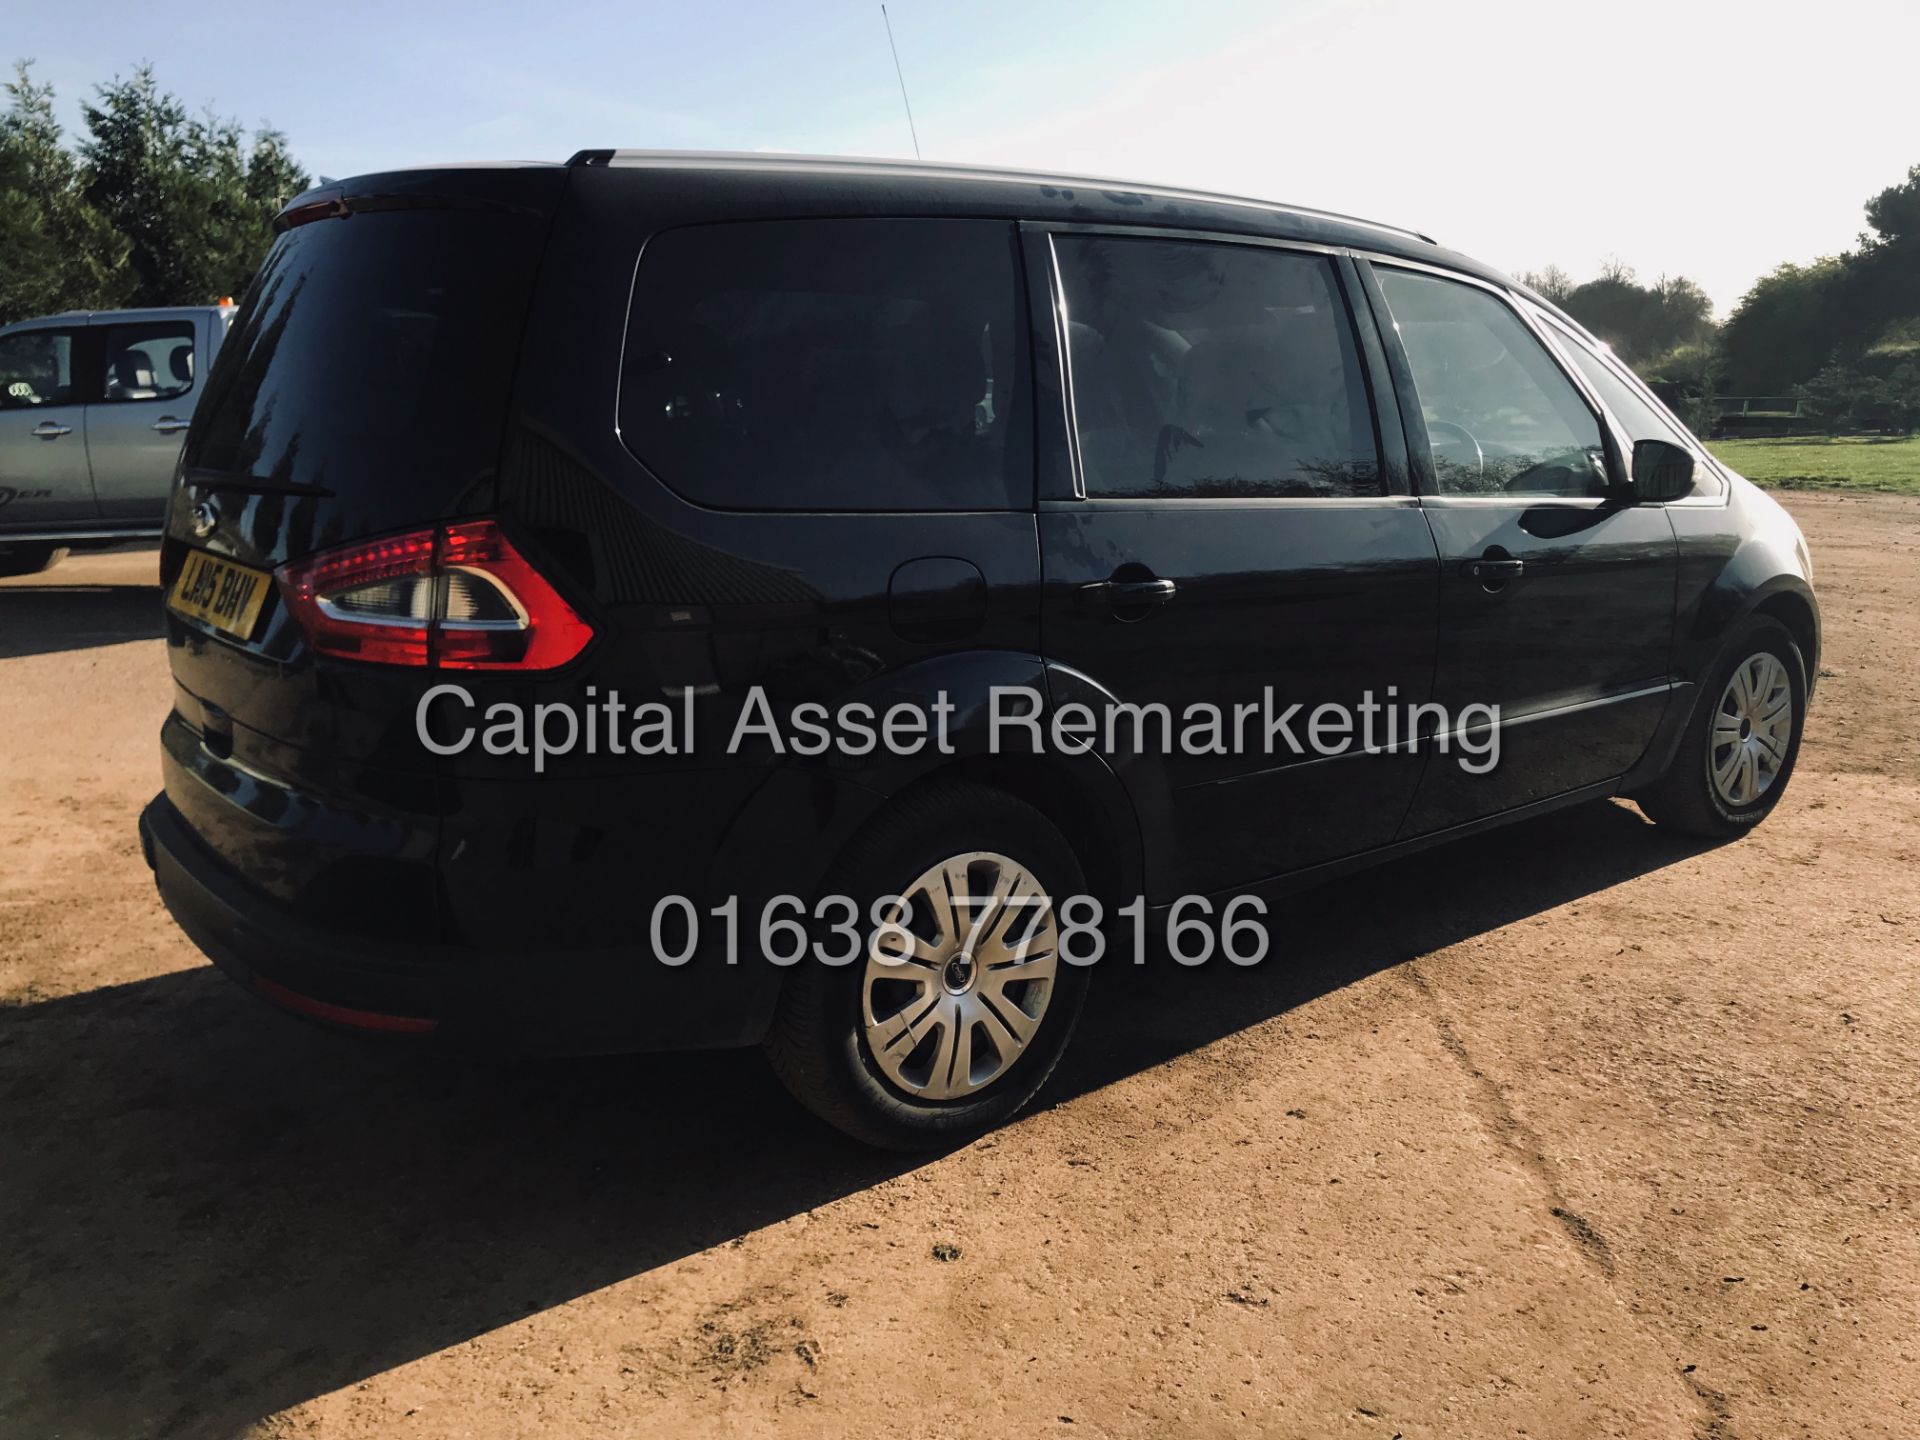 On Sale FORD GALAXY 2.0TDCI "ZETEC - POWERSHIFT" 7 SEATER (15 REG) AIR CON - 1 OWNER - 140BHP ENGINE - Image 3 of 17